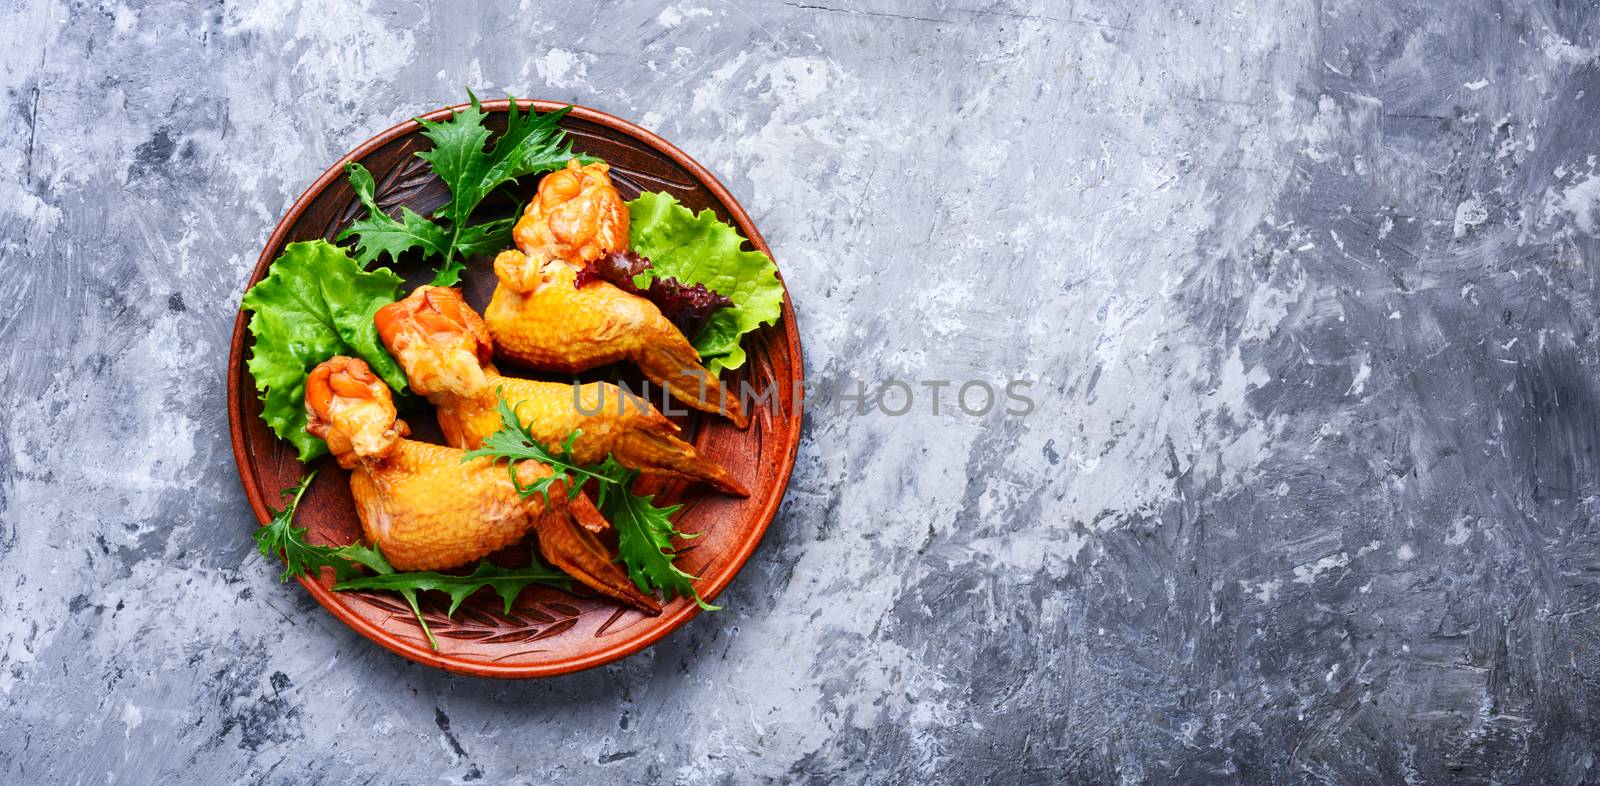 Smoked chicken wings by LMykola